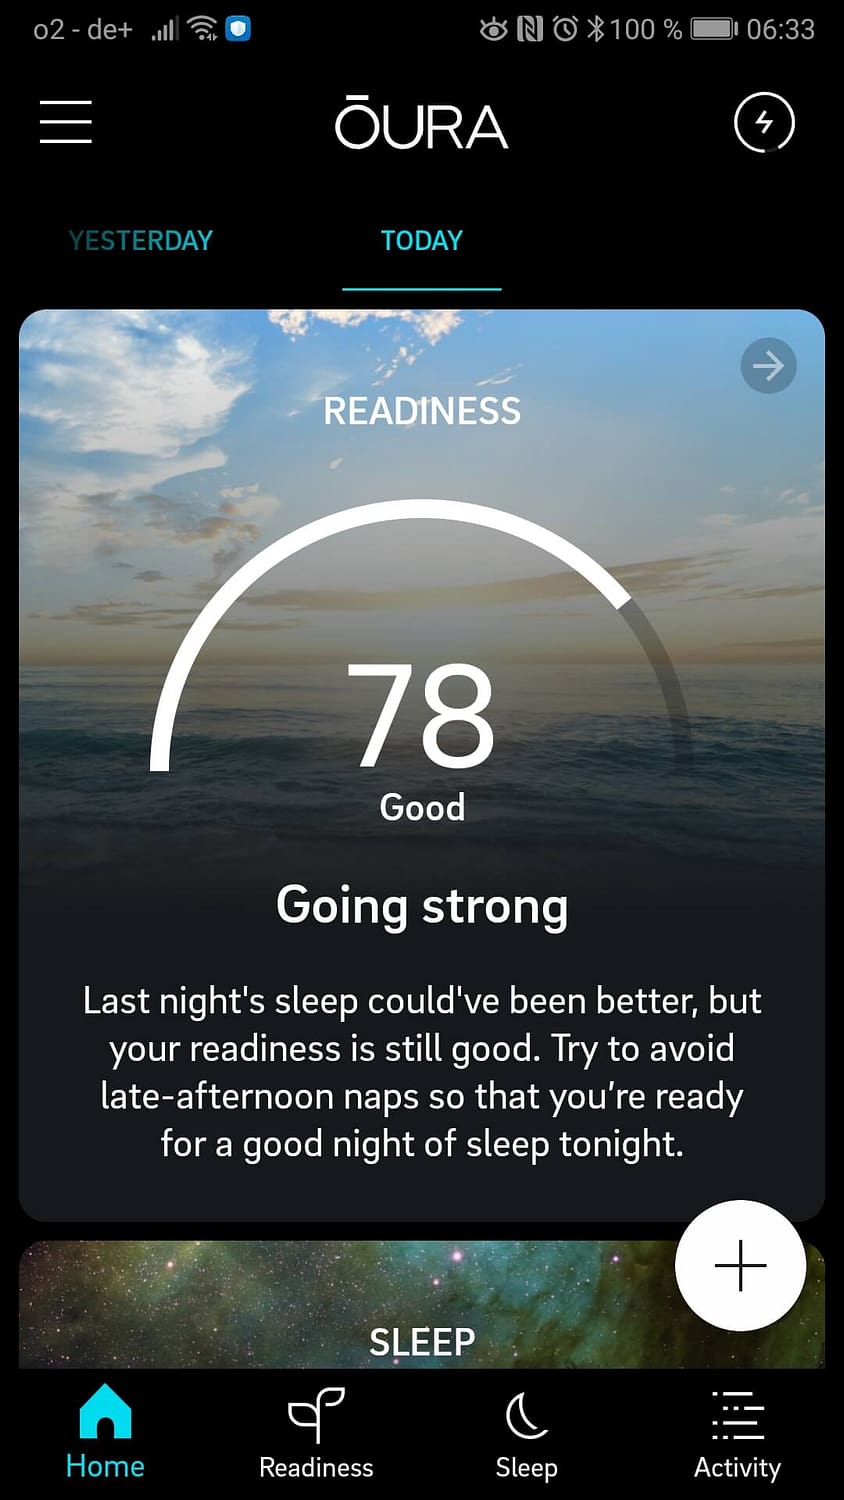 Oura Ring App Readiness